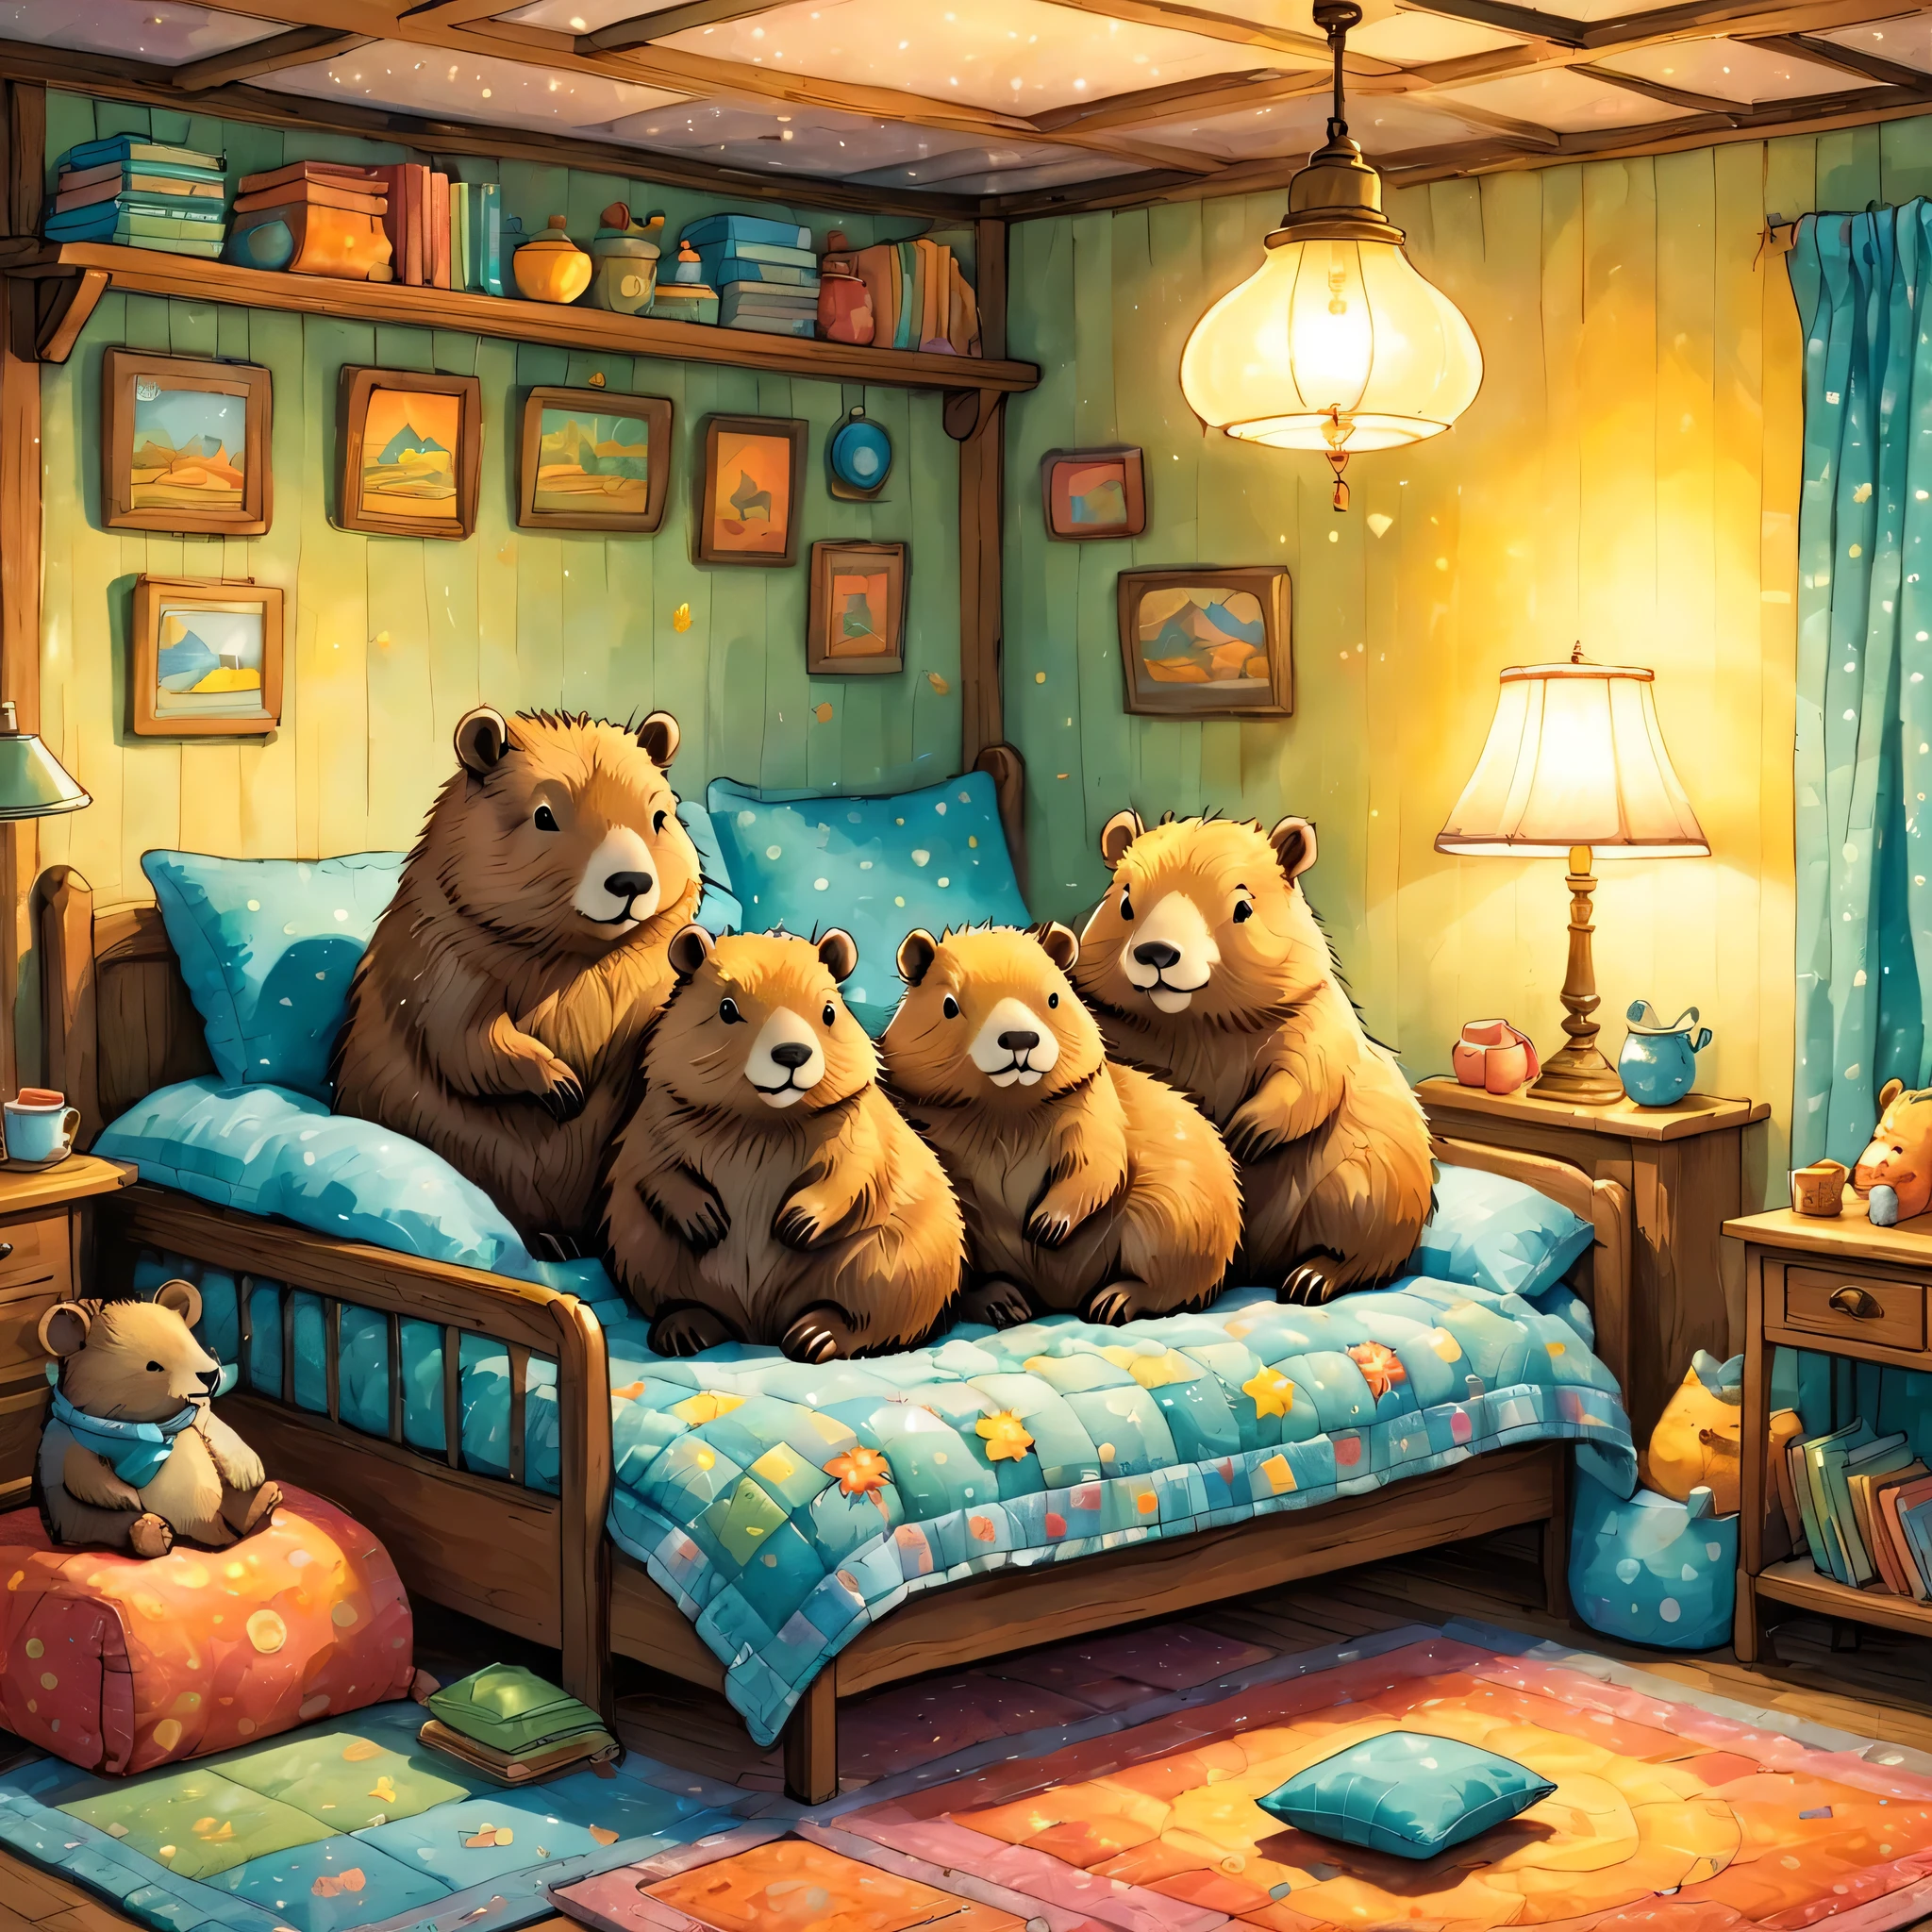 cuteAn illustrationカピバラの家,Capybara family:animal:hibernating:cute:Nestle:sleep:comfortable and warm:looks happy,An illustration,pop,colorfulに,draw with thick lines,color,dim,Lamp light,hibernatingのCapybara familyが眠っています:dream happy dreams,The house is warm and full of happiness,,colorful,Fancy,Fantasy,patchwork:quilt,detailed details,fluffy,Randolph Caldecott Style,豊富なcolor,Cast colorful spells,concentrated,The best configuration,Perfect composition,accent,子供が喜ぶAn illustration,For kids,feel warm,wonderful like a dream,Happy and fun looking capybaras,Little,Cast colorful spells,Sparkling,Anatomically correct,scarf,pajamas